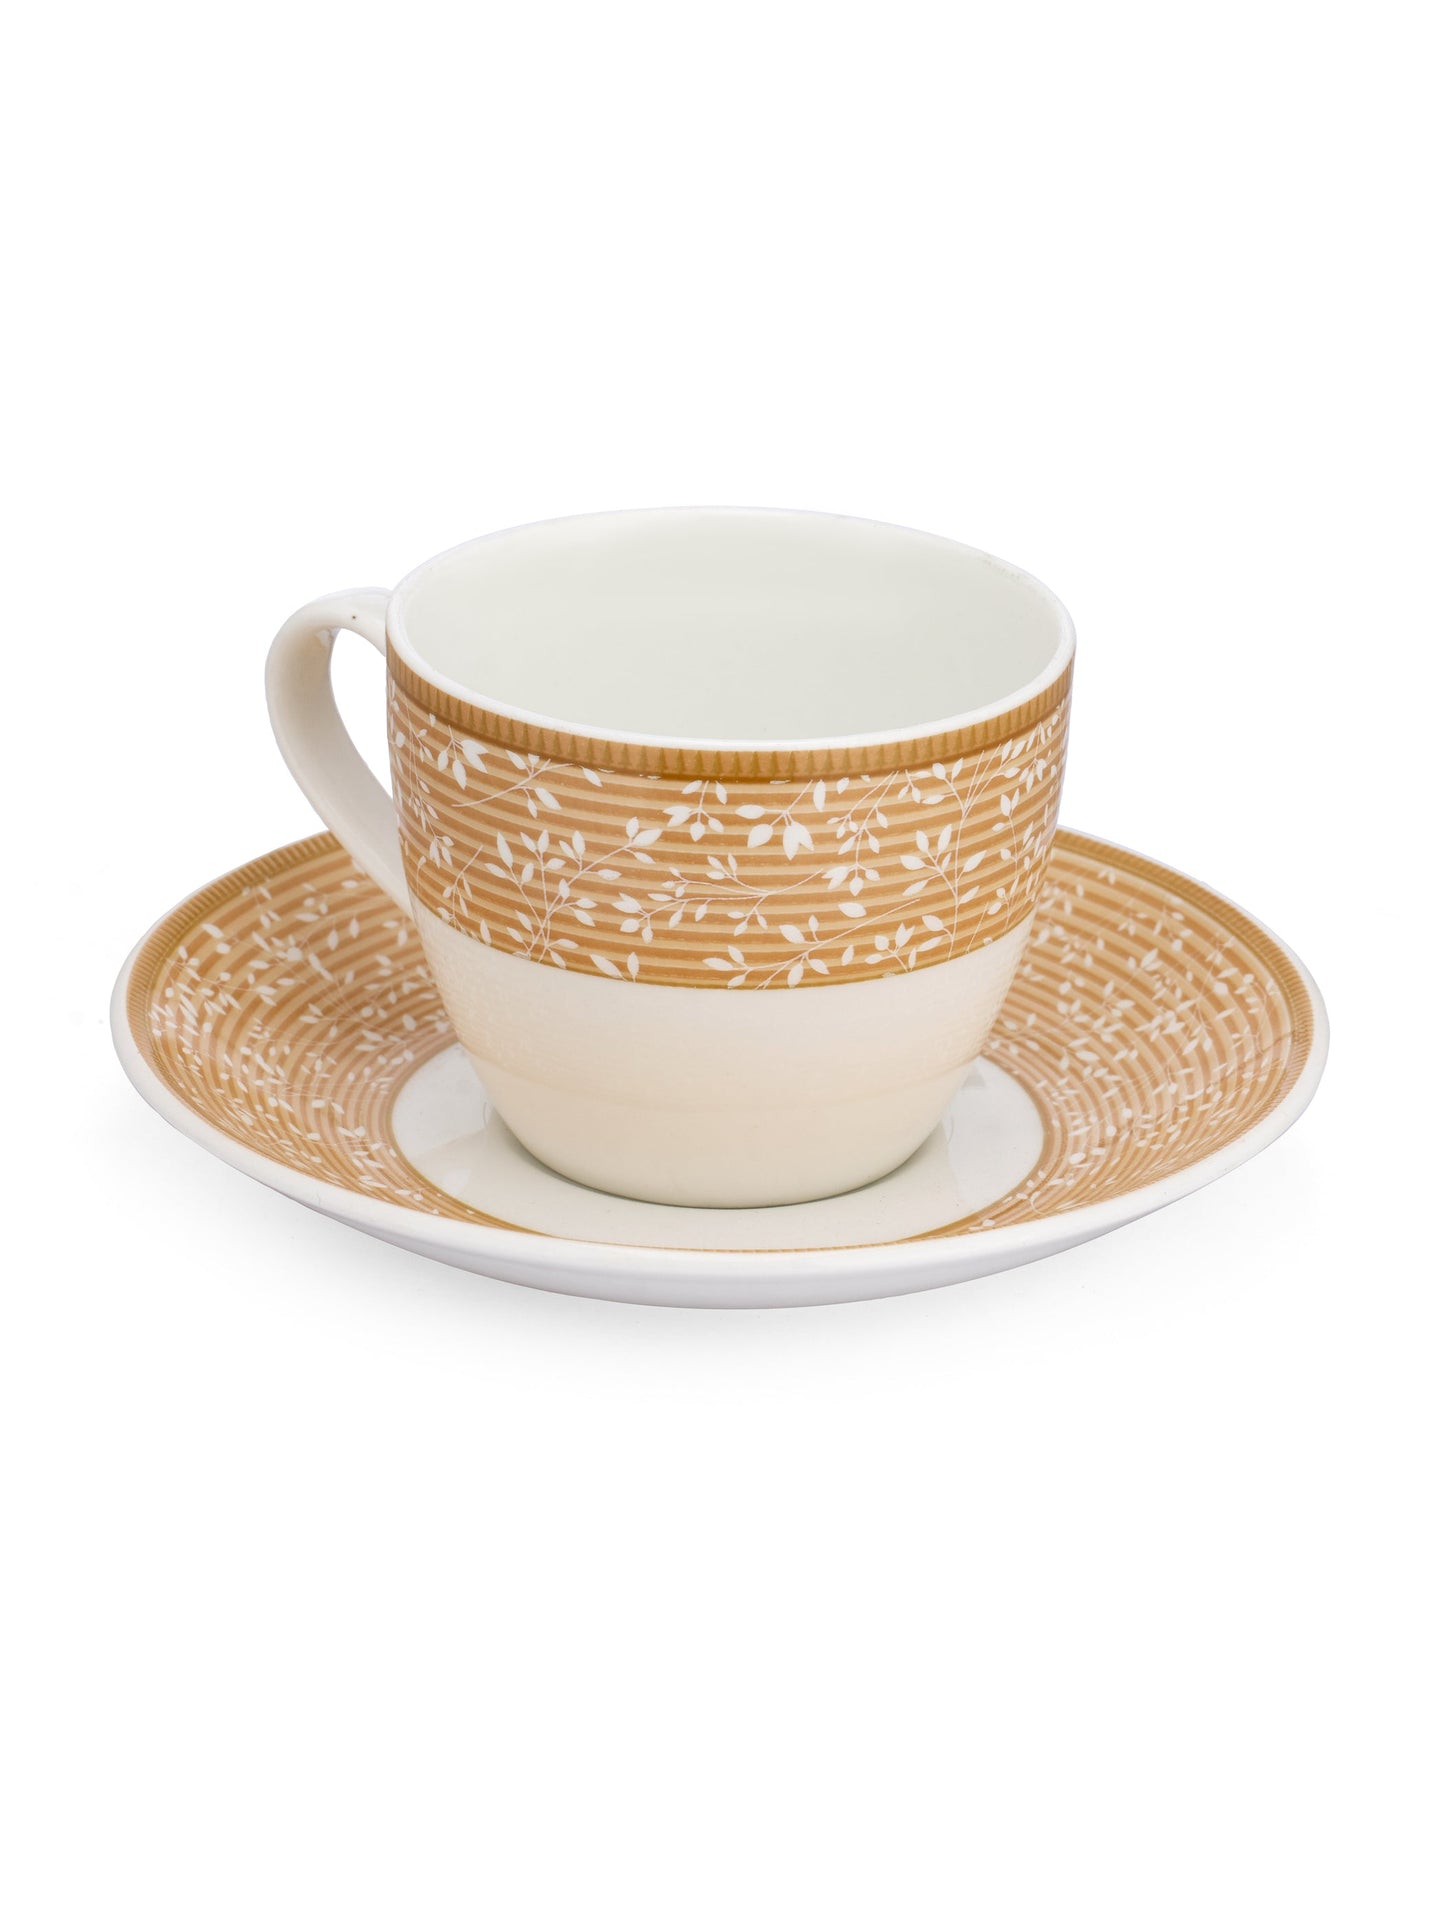 Cream Super Cup & Saucer, 210ml, Set of 12 (6 Cups + 6 Saucers) (S305)